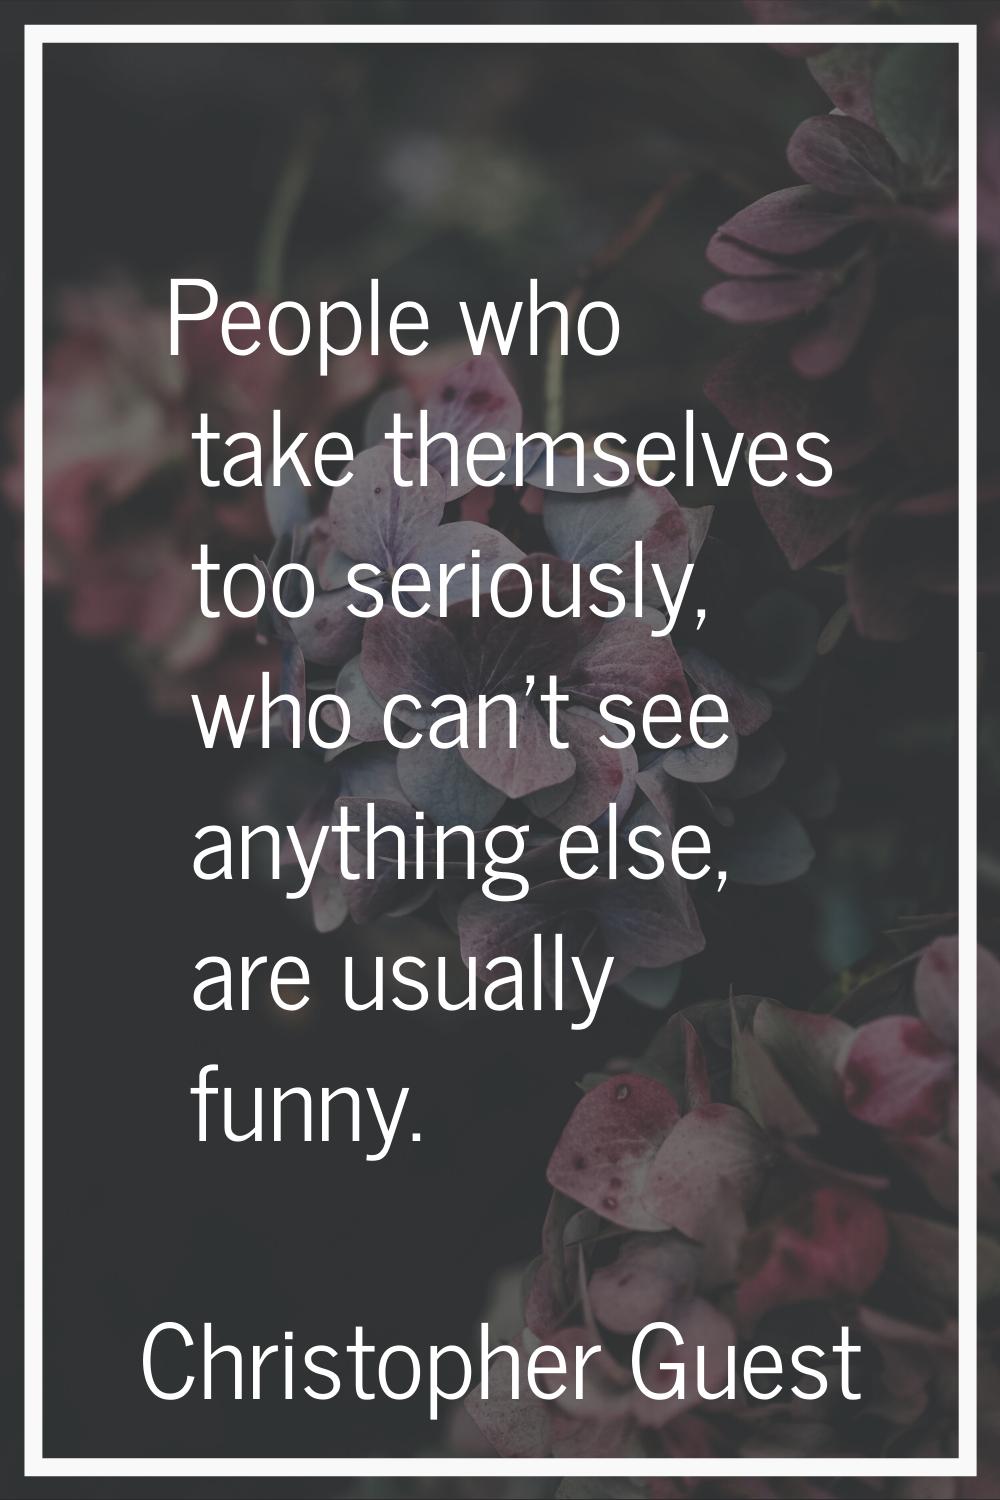 People who take themselves too seriously, who can't see anything else, are usually funny.